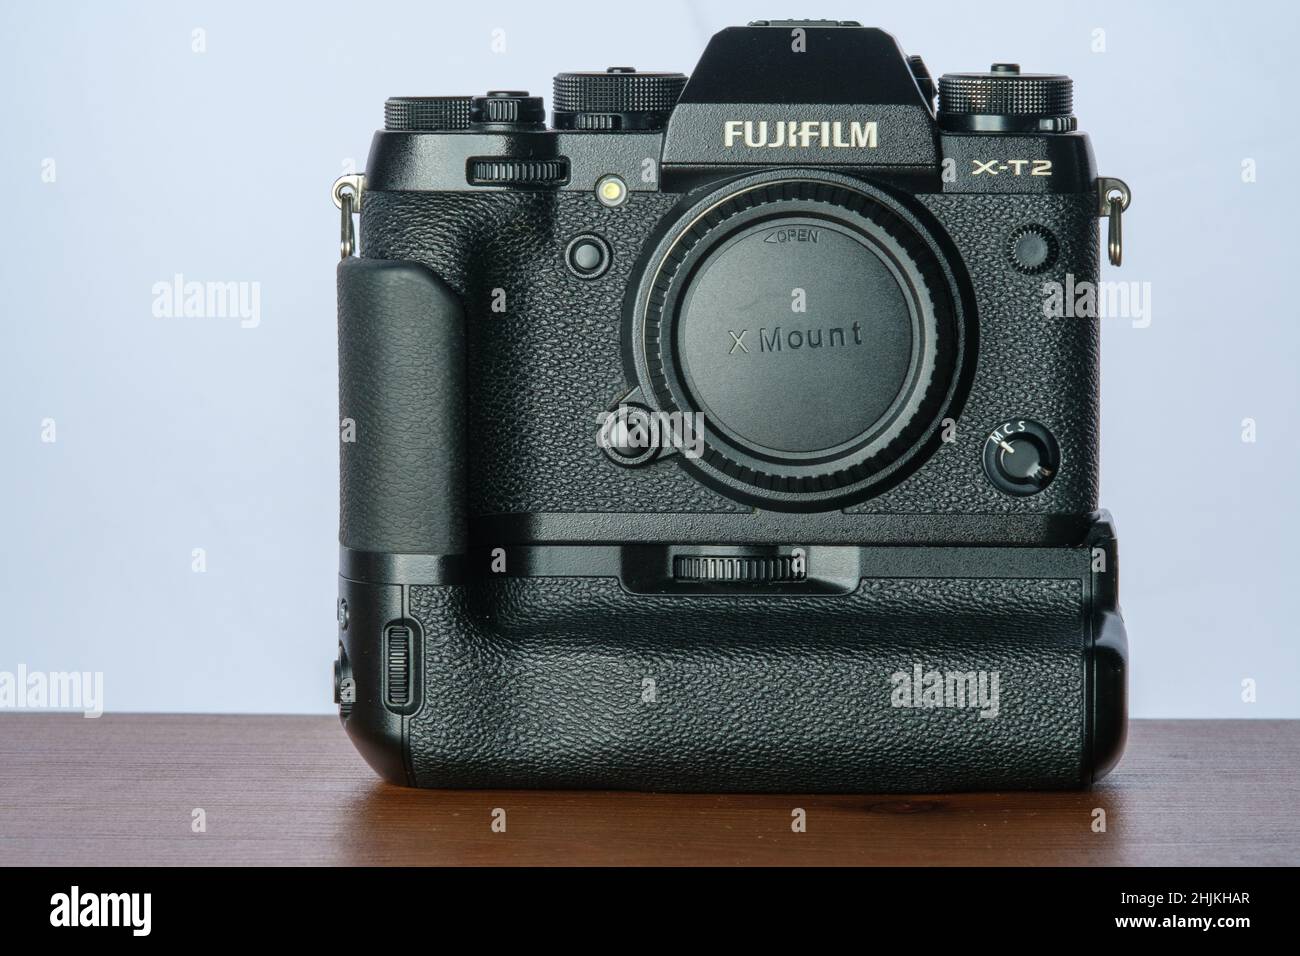 View of the mirrorless Fuji film aps-c camera with a battery grip on Stock Photo